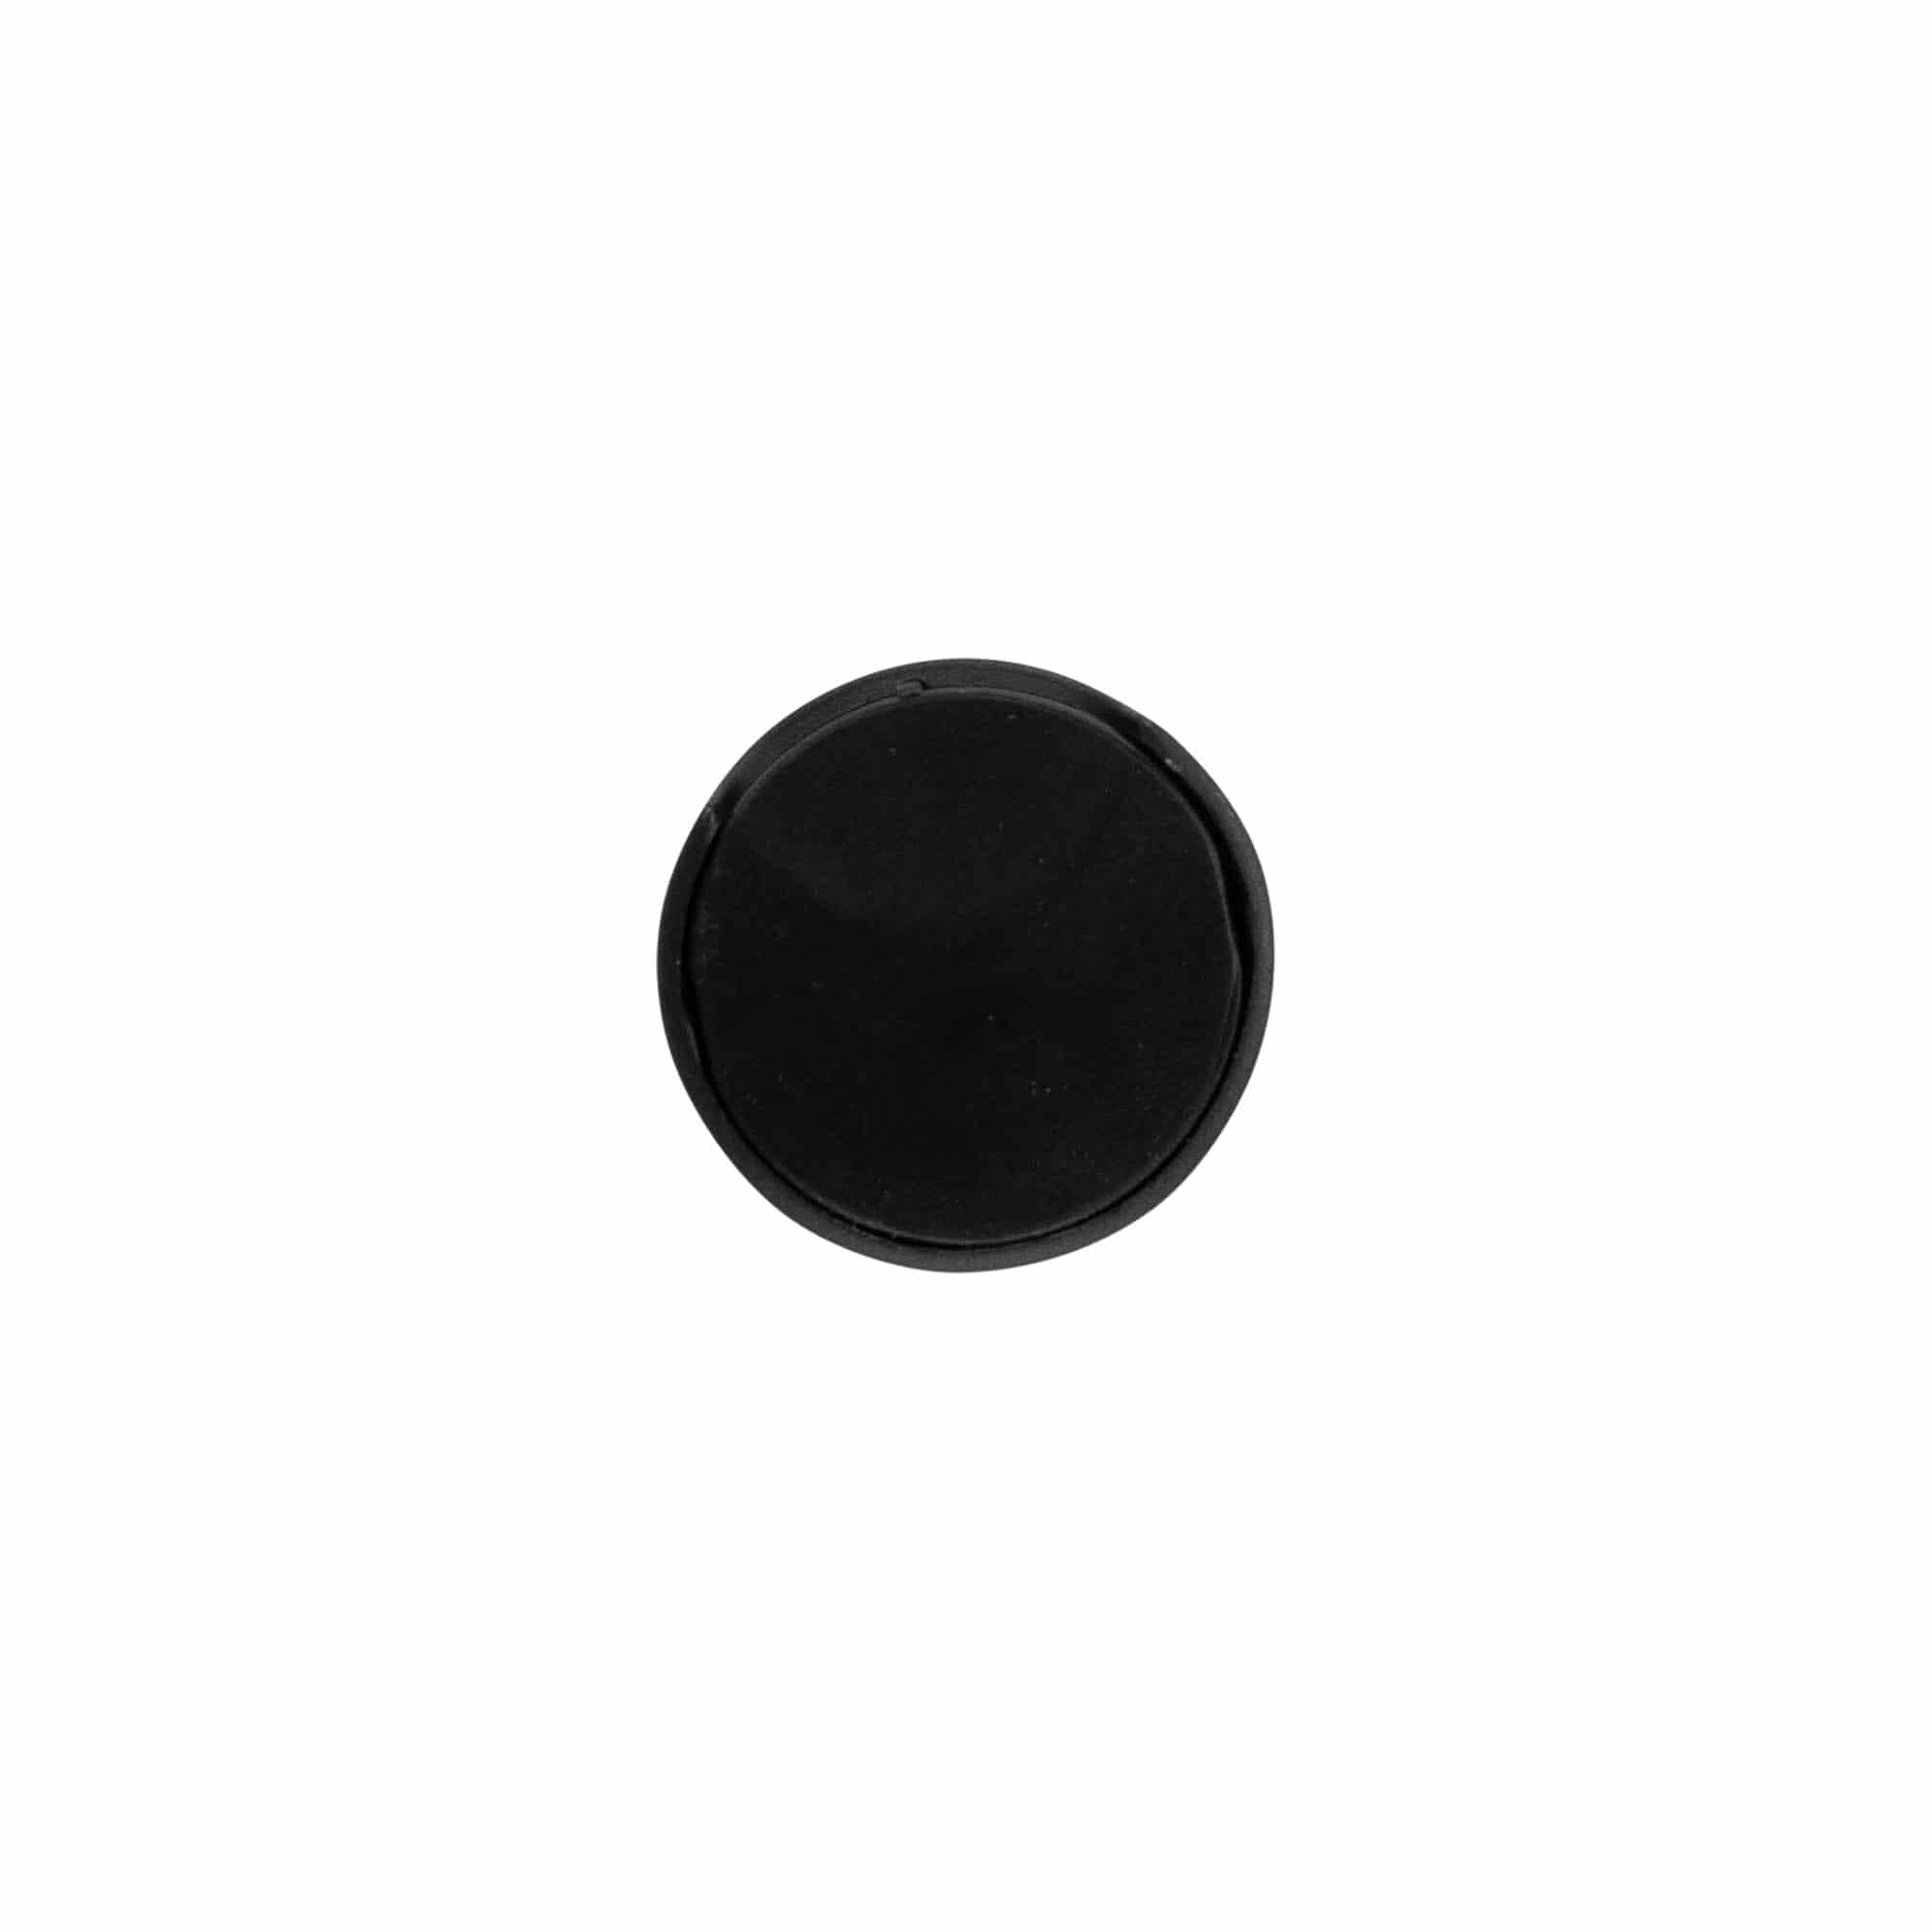 Screw cap with disc top, PP plastic, black, for opening: GPI 24/410